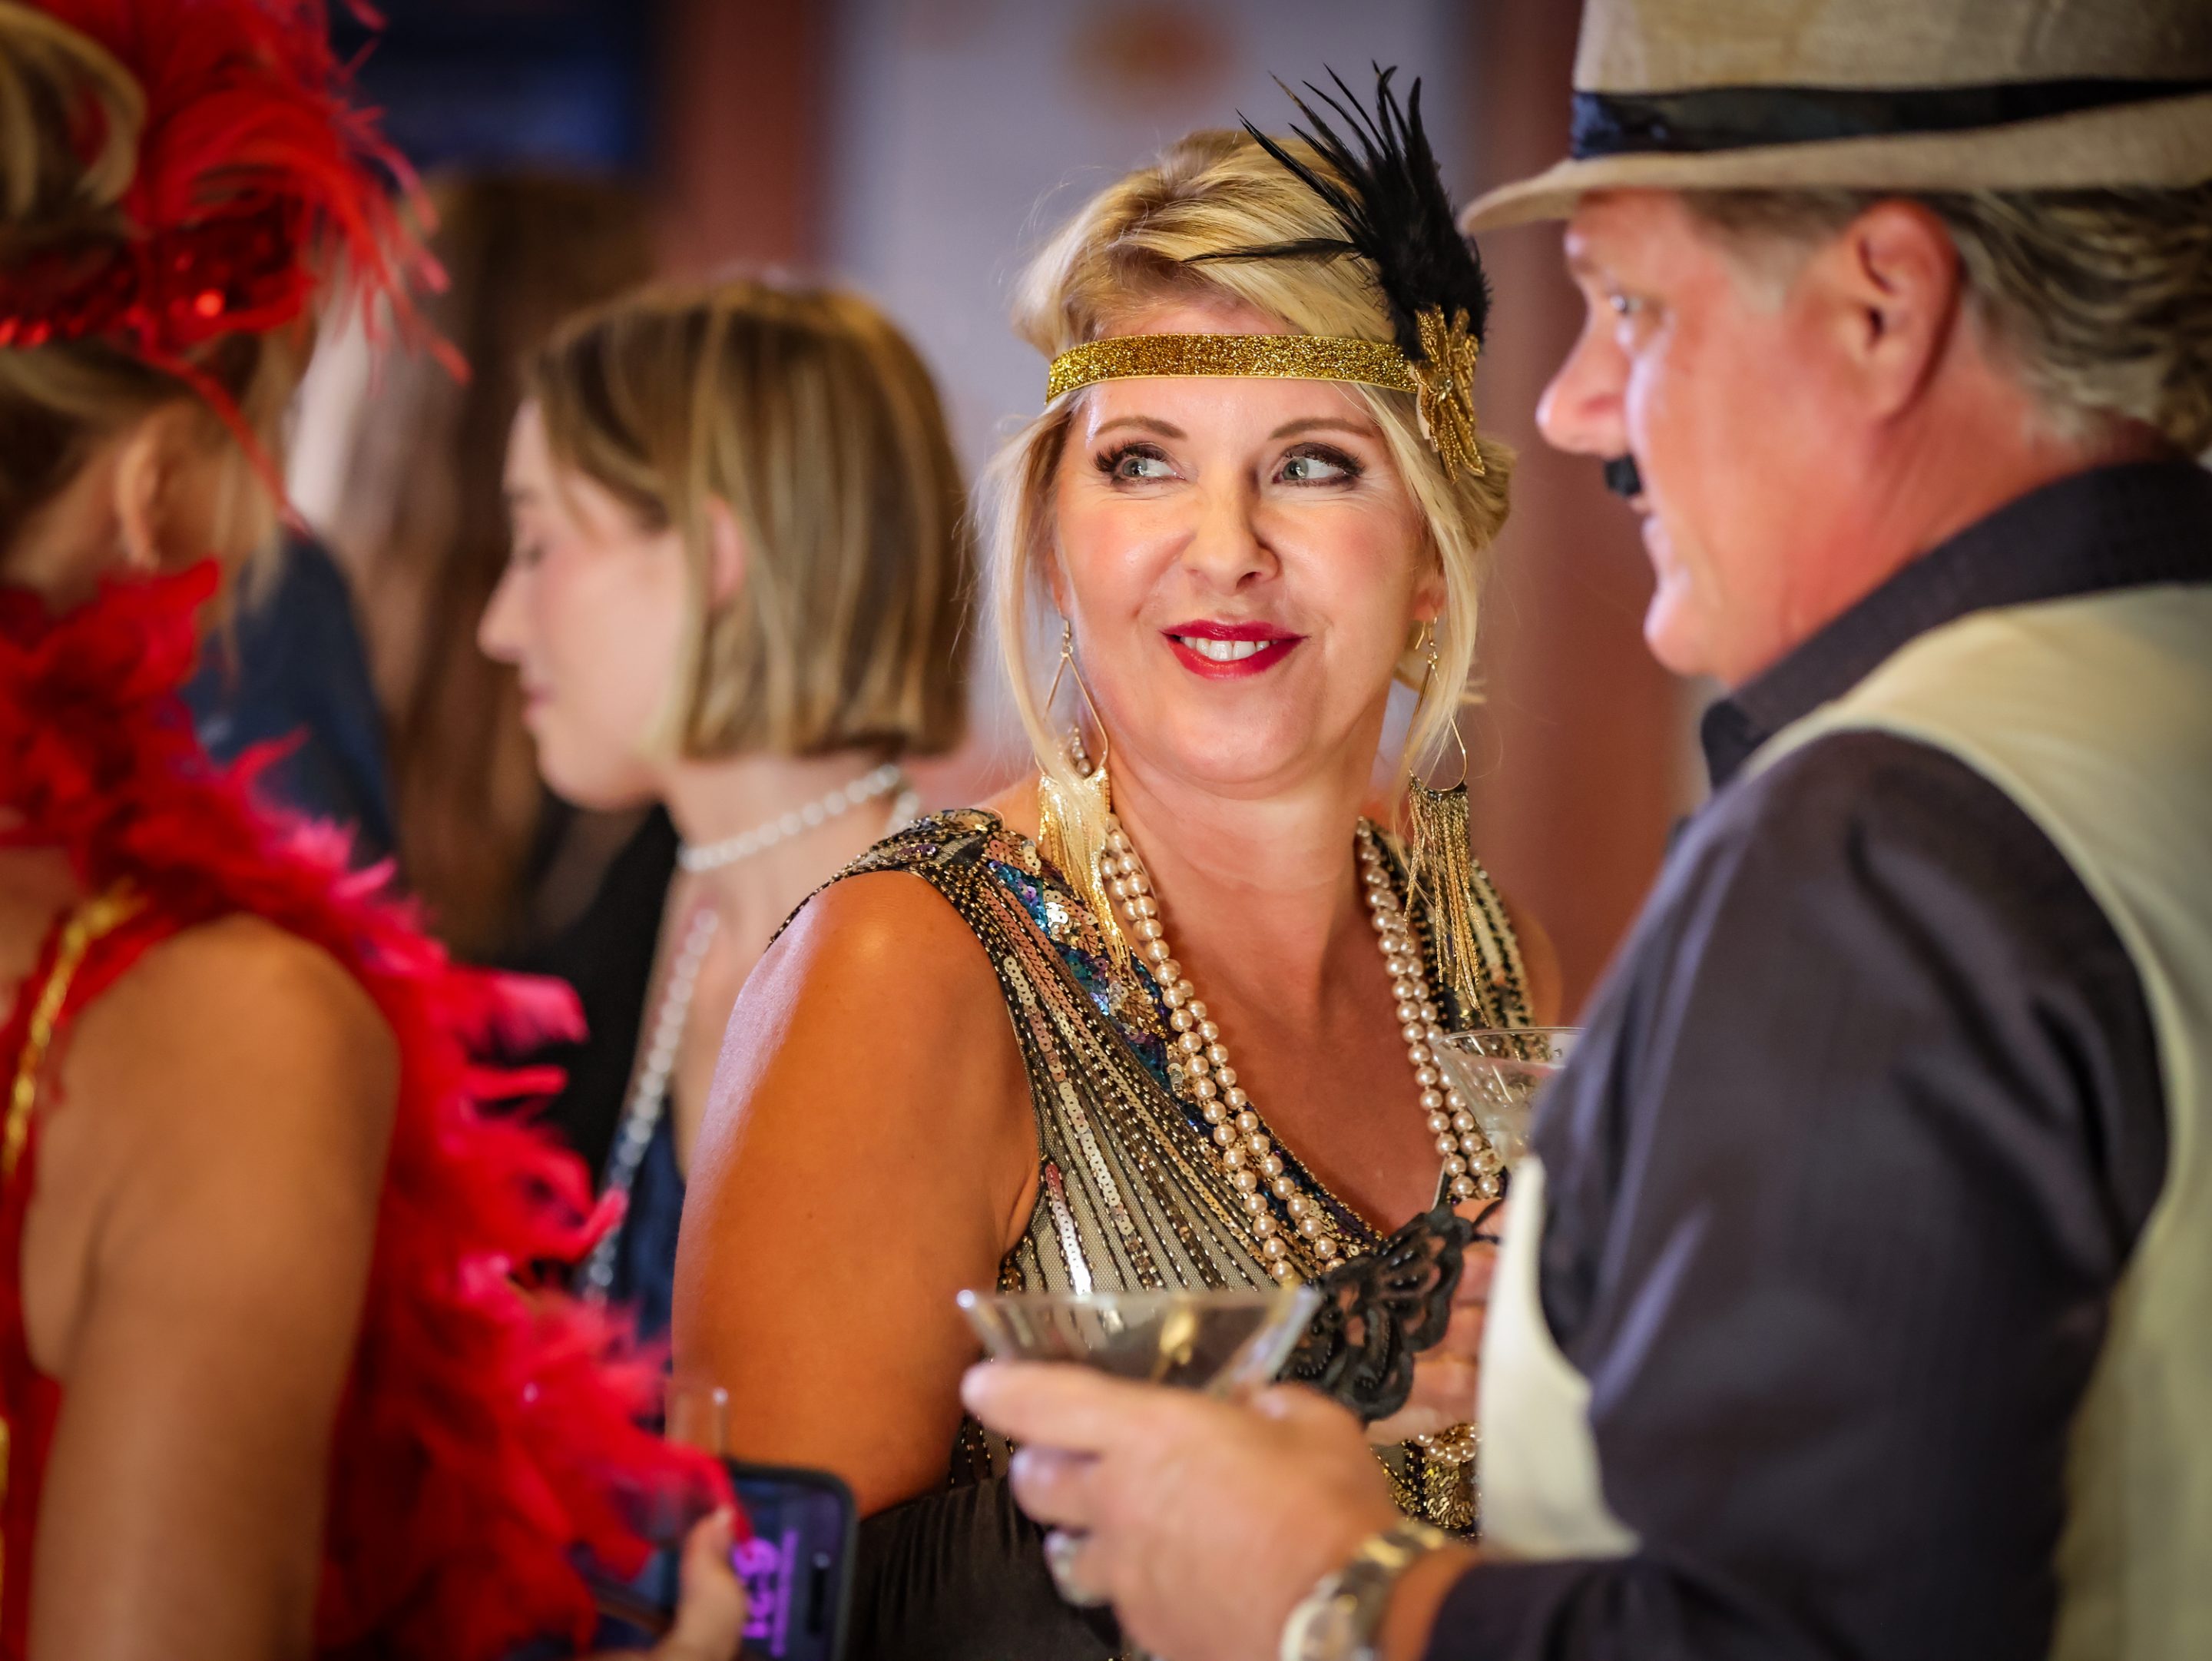 A group of people at a party dressed in flapper costumes hosted by The LIME Foundation of Santa Rosa.